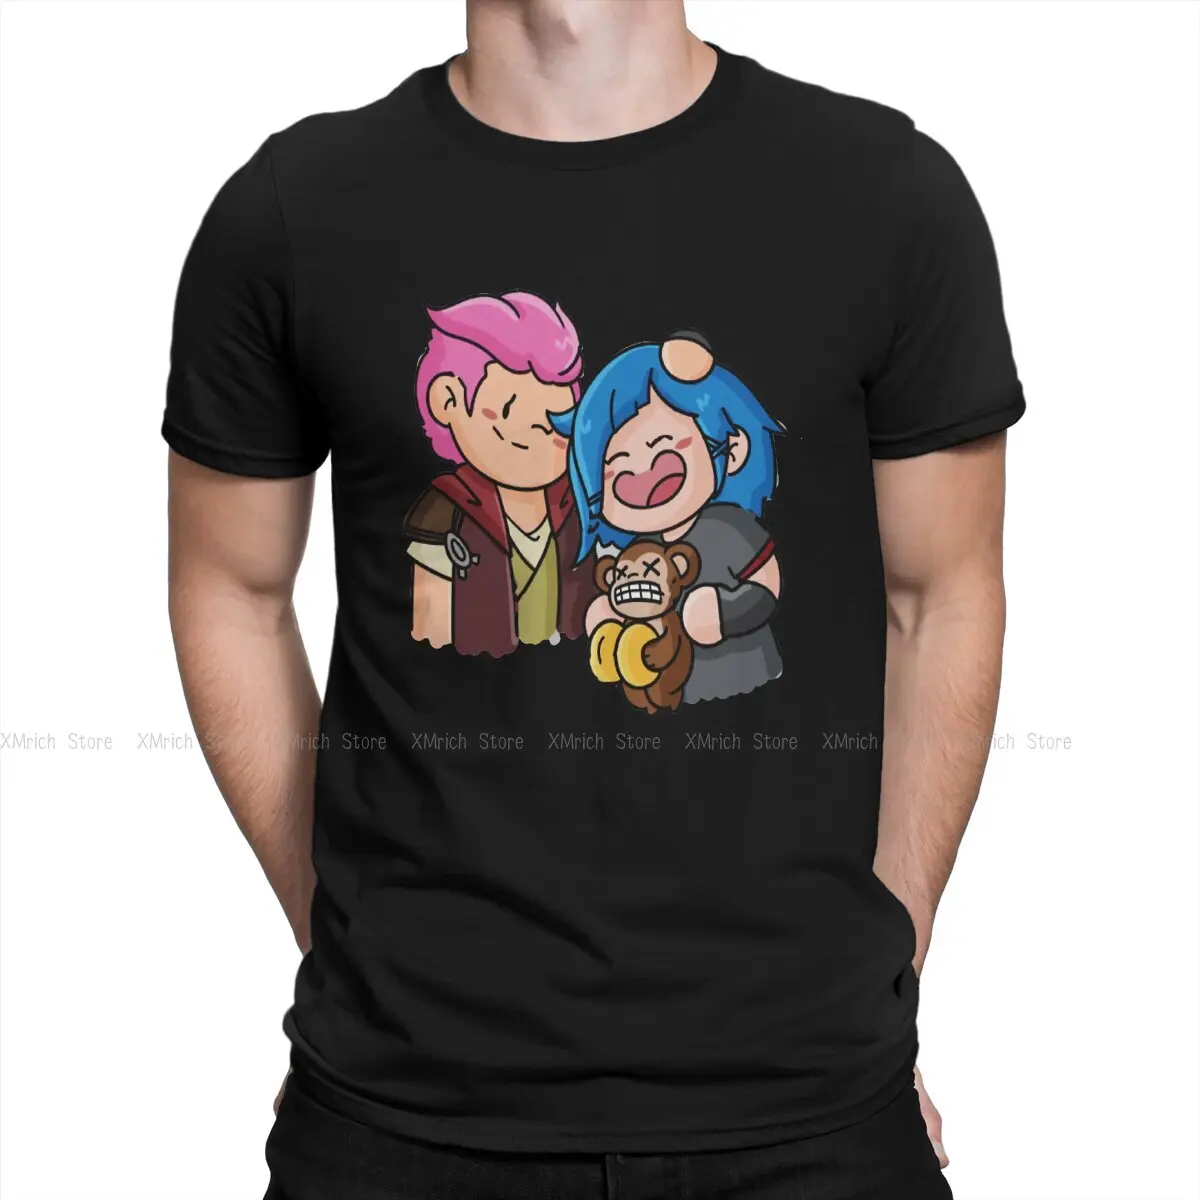 

Arcane League of Legends Animated Creative TShirt for Men Vi & Jinx Round Neck Basic T Shirt Personalize Gift Clothes Tops